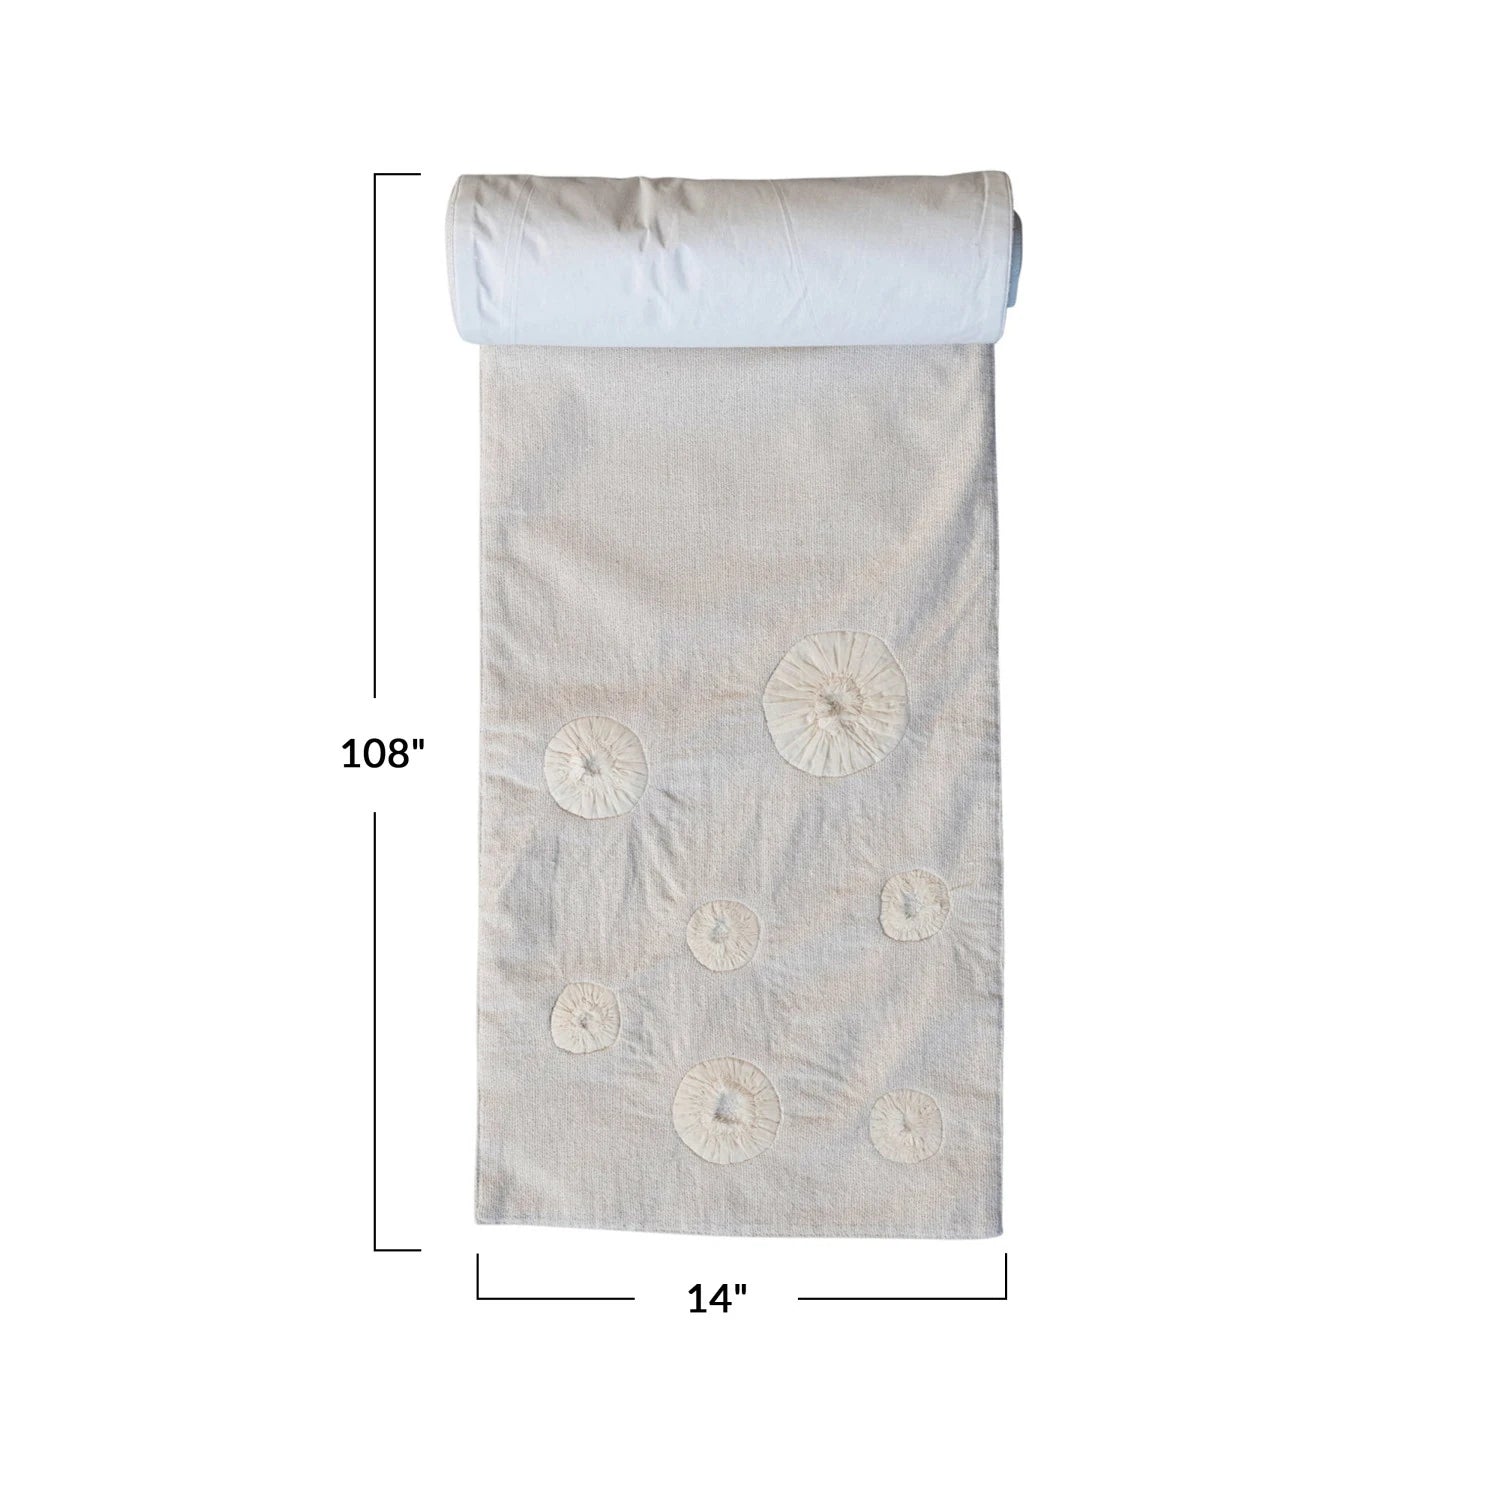 Measurements of the Handmade woven cotton and linen table runner with applique.